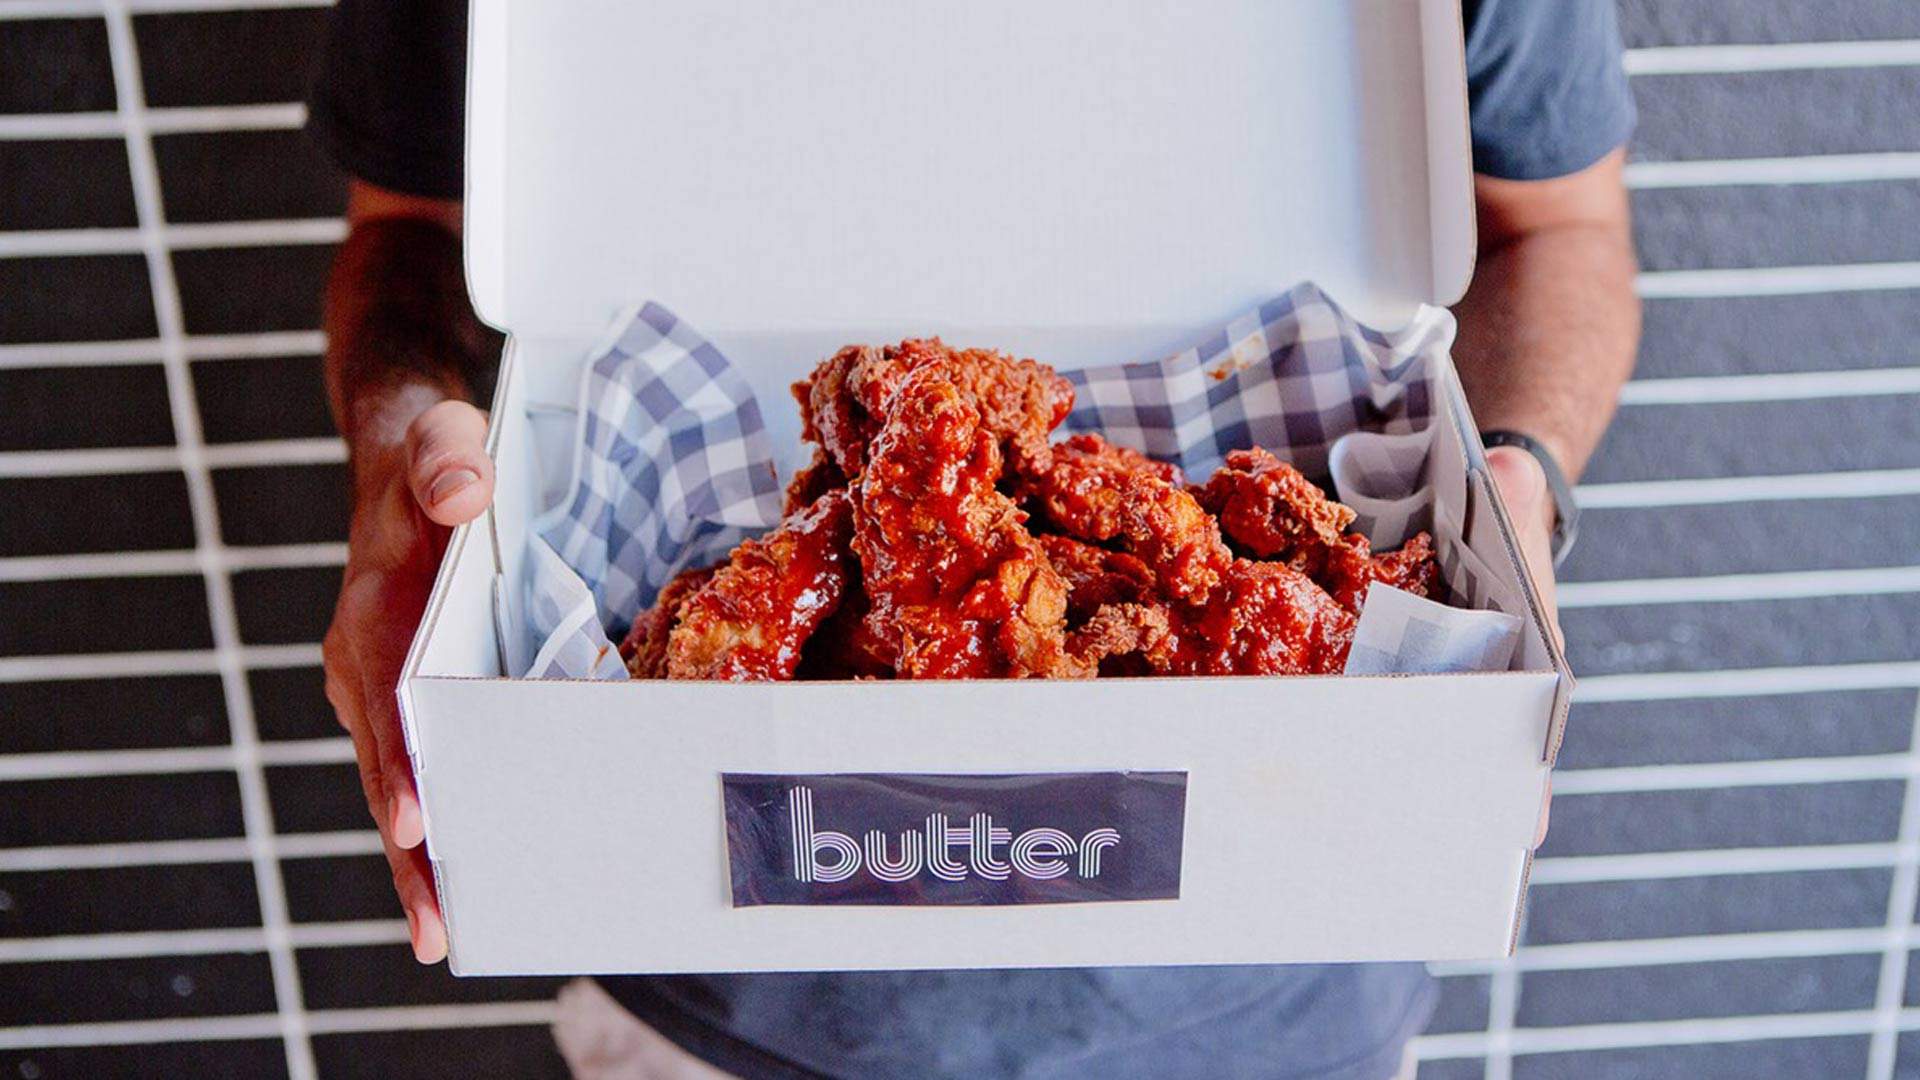 Sydney's Fried Chicken and Rare Sneaker Shop Butter Is Launching an Outpost in Chatswood